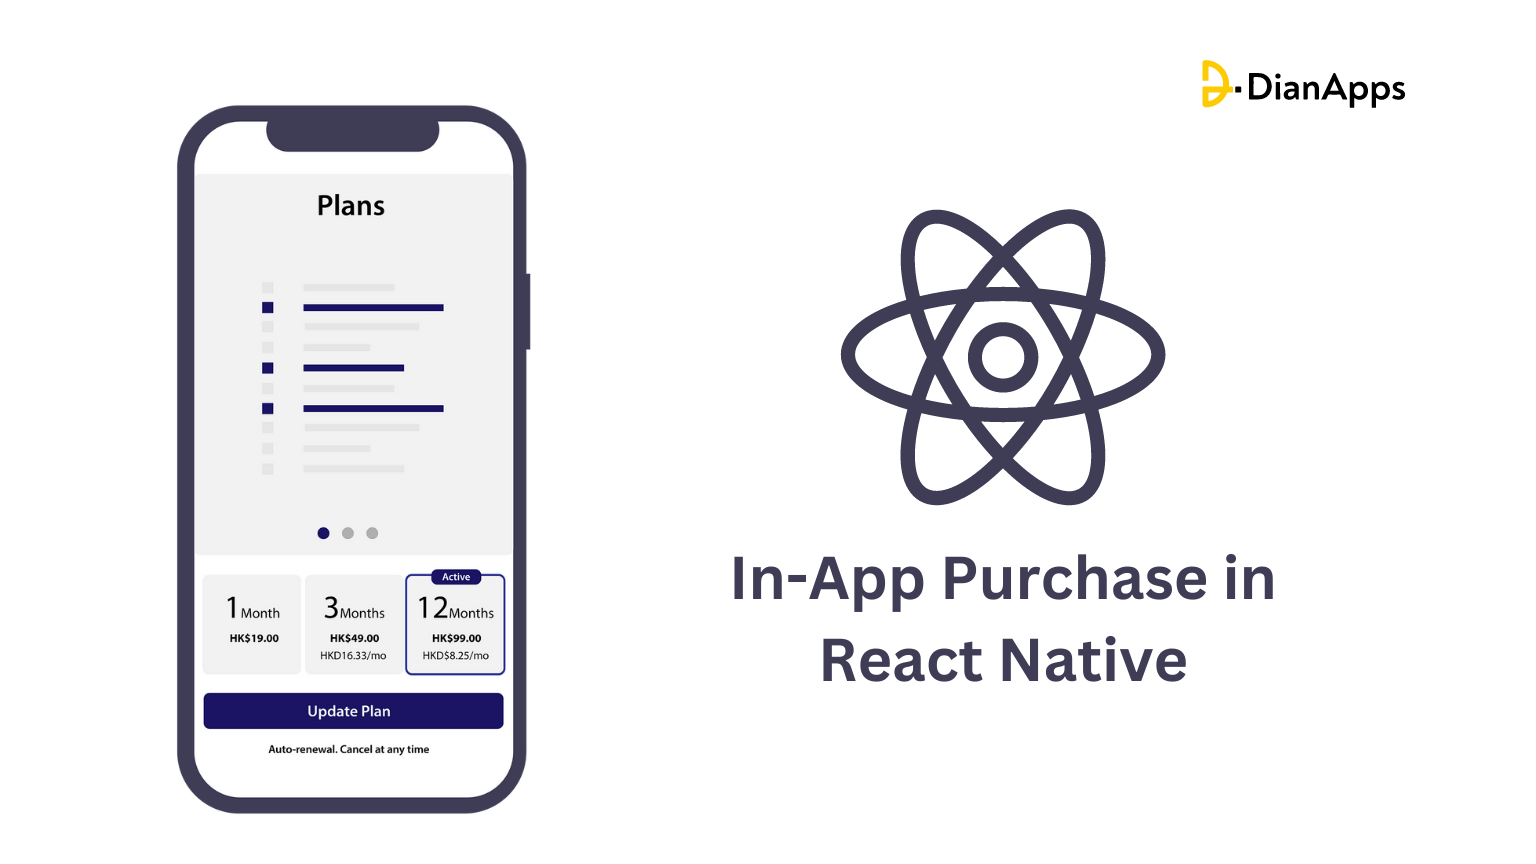 In-App Purchase in React Native